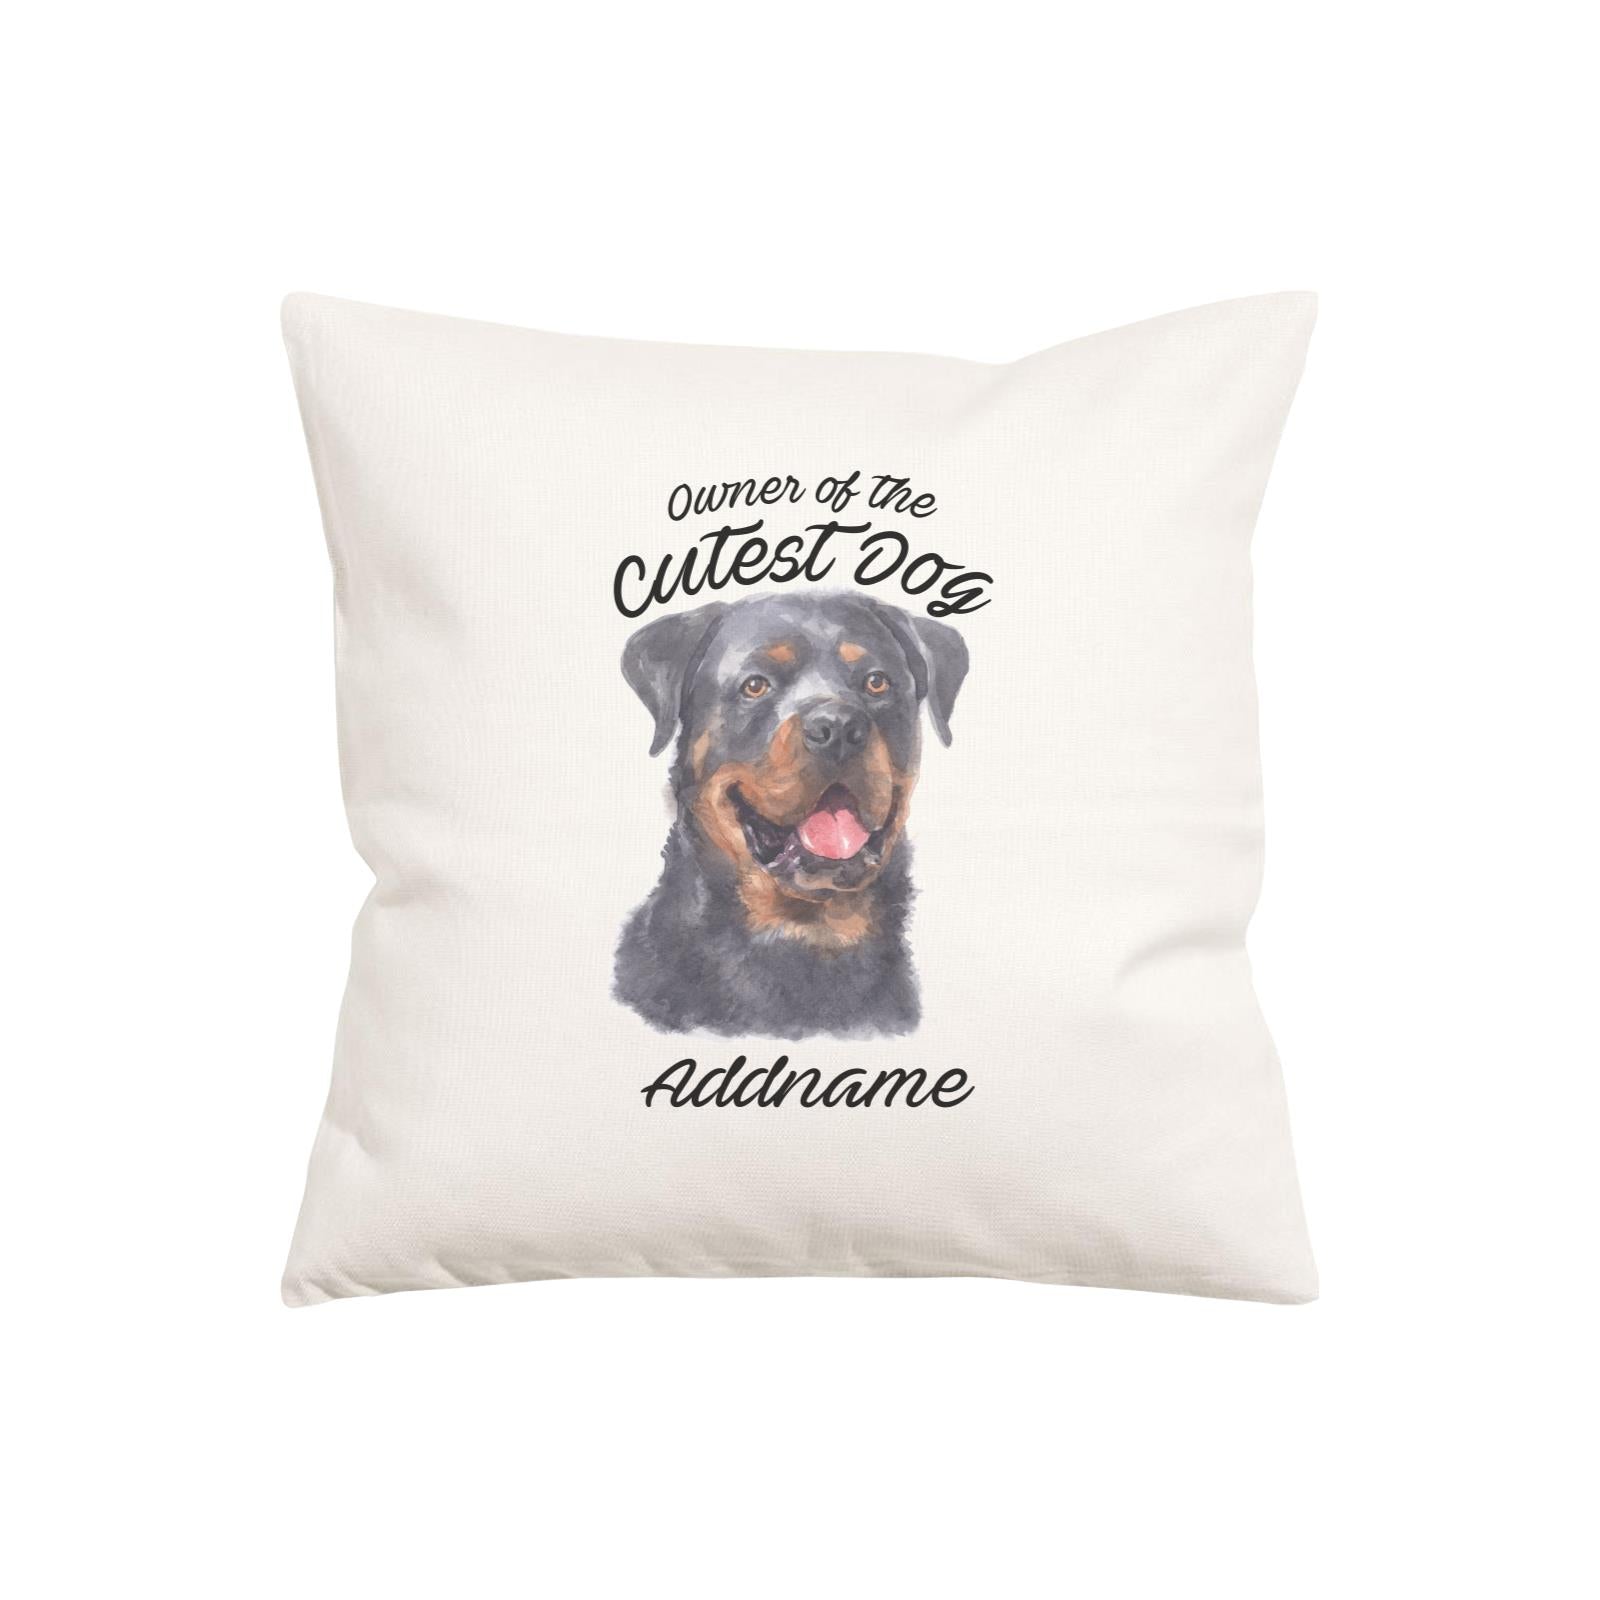 Watercolor Dog Owner Of The Cutest Dog Rottweiler Addname Pillow Cushion